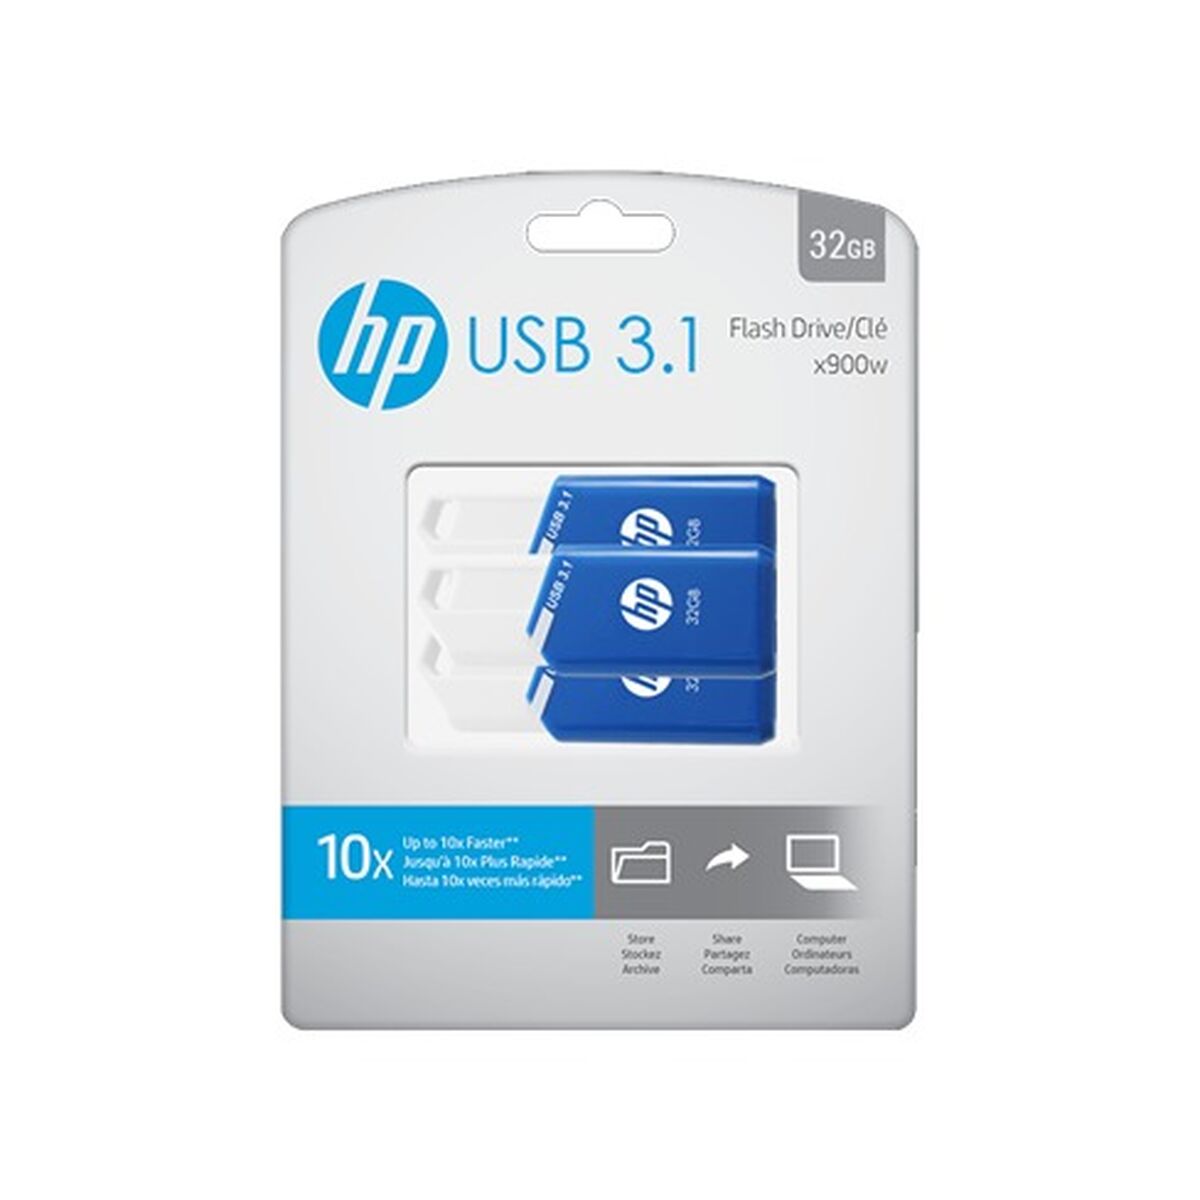 USB stick HP 32 GB, HP, Computing, Data storage, usb-stick-hp-32-gb, Brand_HP, category-reference-2609, category-reference-2803, category-reference-2817, category-reference-t-19685, category-reference-t-19909, category-reference-t-21355, computers / components, Condition_NEW, Price_20 - 50, Teleworking, RiotNook